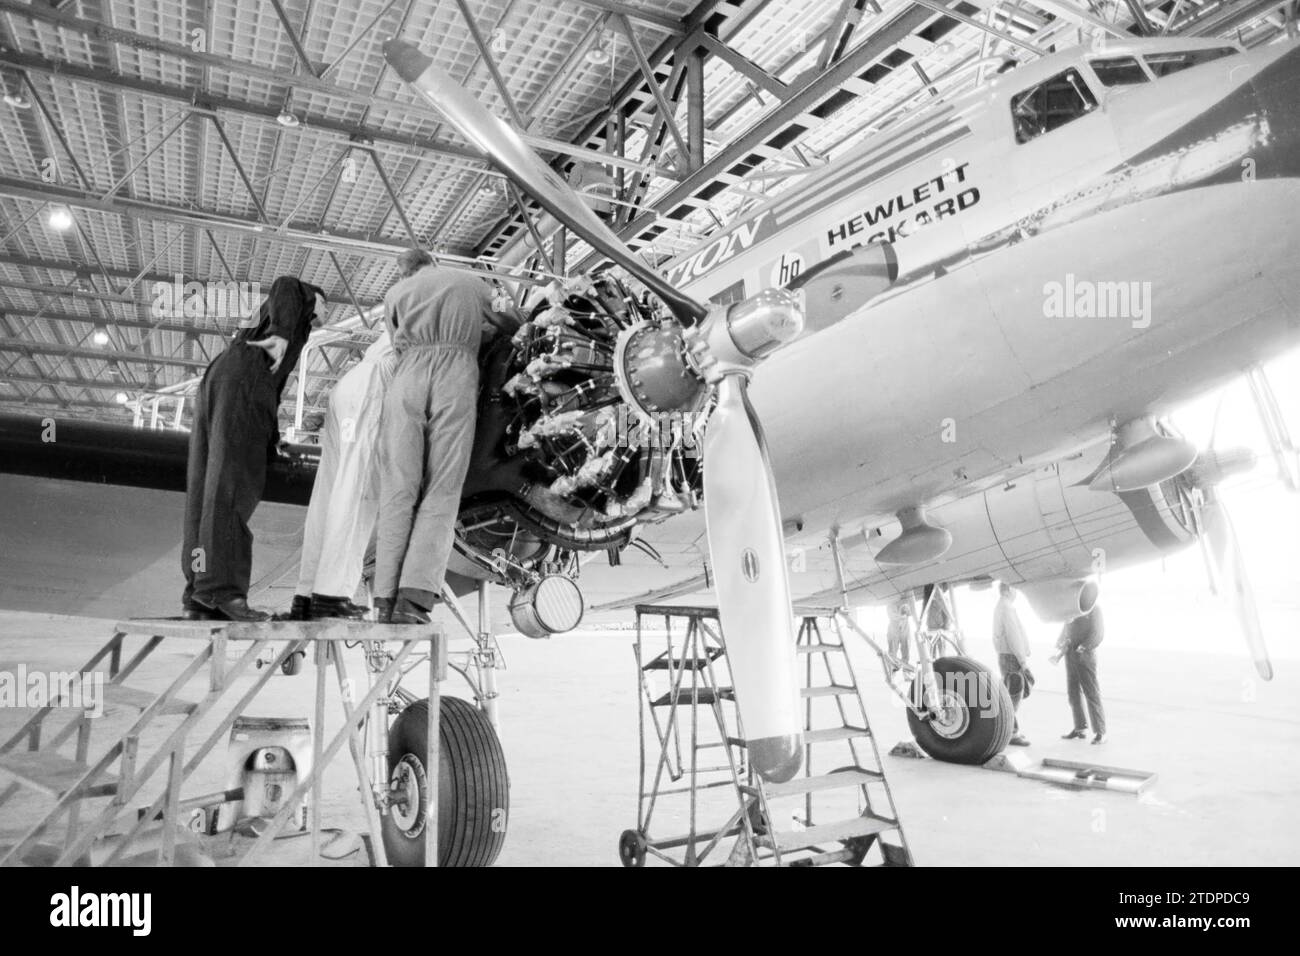 Built-in overhaul engine Dakota, DDA, Aircraft, 31-05-1985, Whizgle News from the Past, Tailored for the Future. Explore historical narratives, Dutch The Netherlands agency image with a modern perspective, bridging the gap between yesterday's events and tomorrow's insights. A timeless journey shaping the stories that shape our future Stock Photo